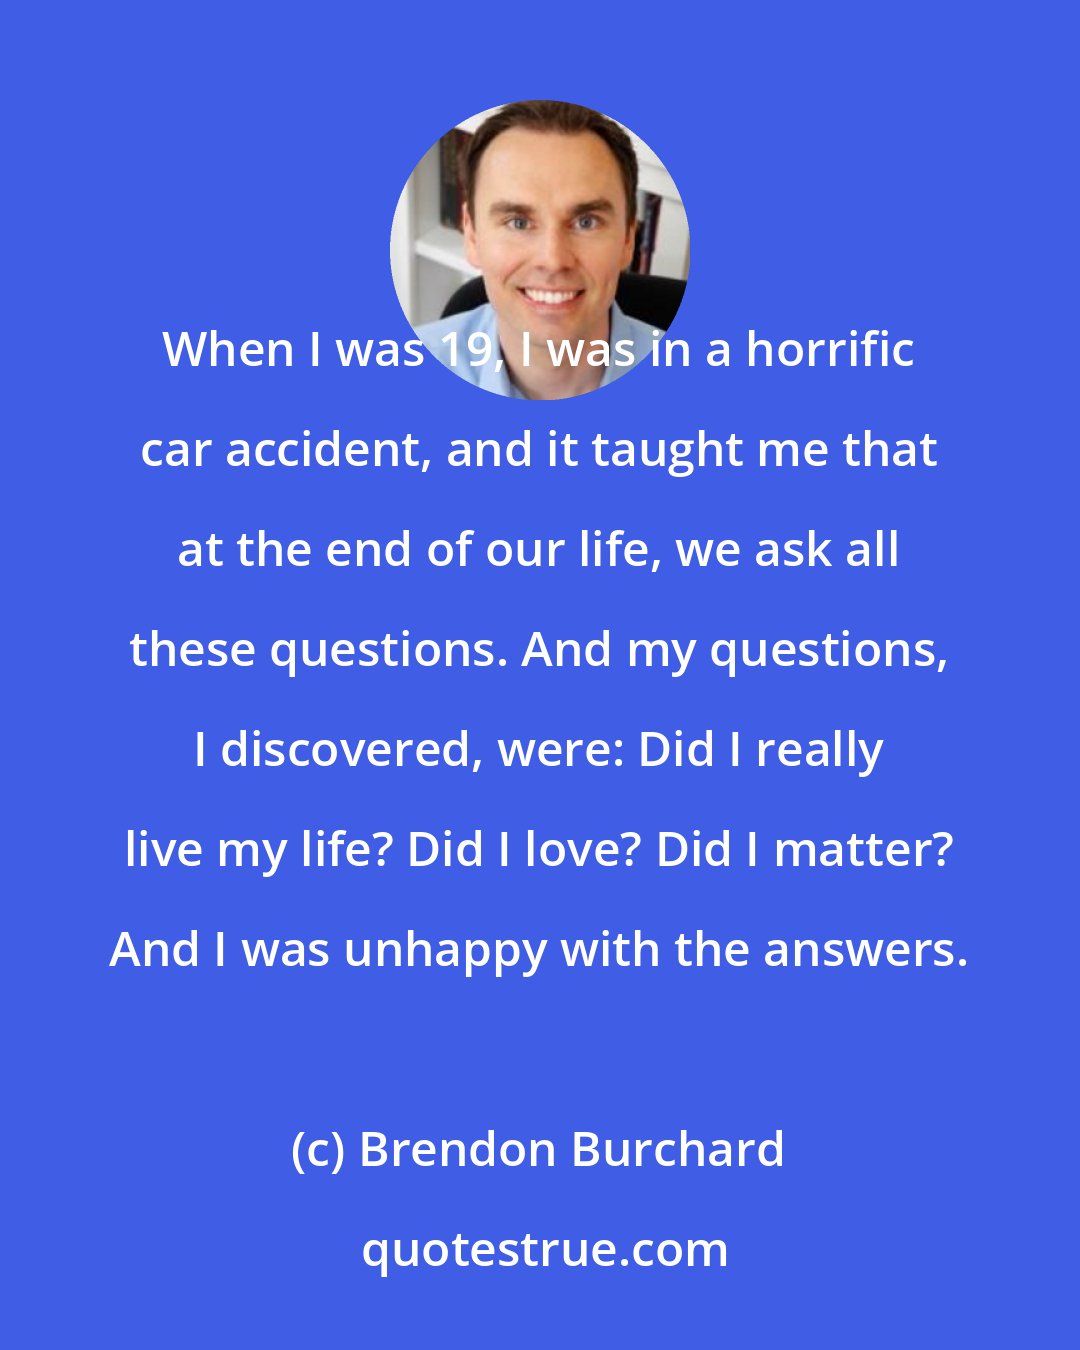 Brendon Burchard: When I was 19, I was in a horrific car accident, and it taught me that at the end of our life, we ask all these questions. And my questions, I discovered, were: Did I really live my life? Did I love? Did I matter? And I was unhappy with the answers.